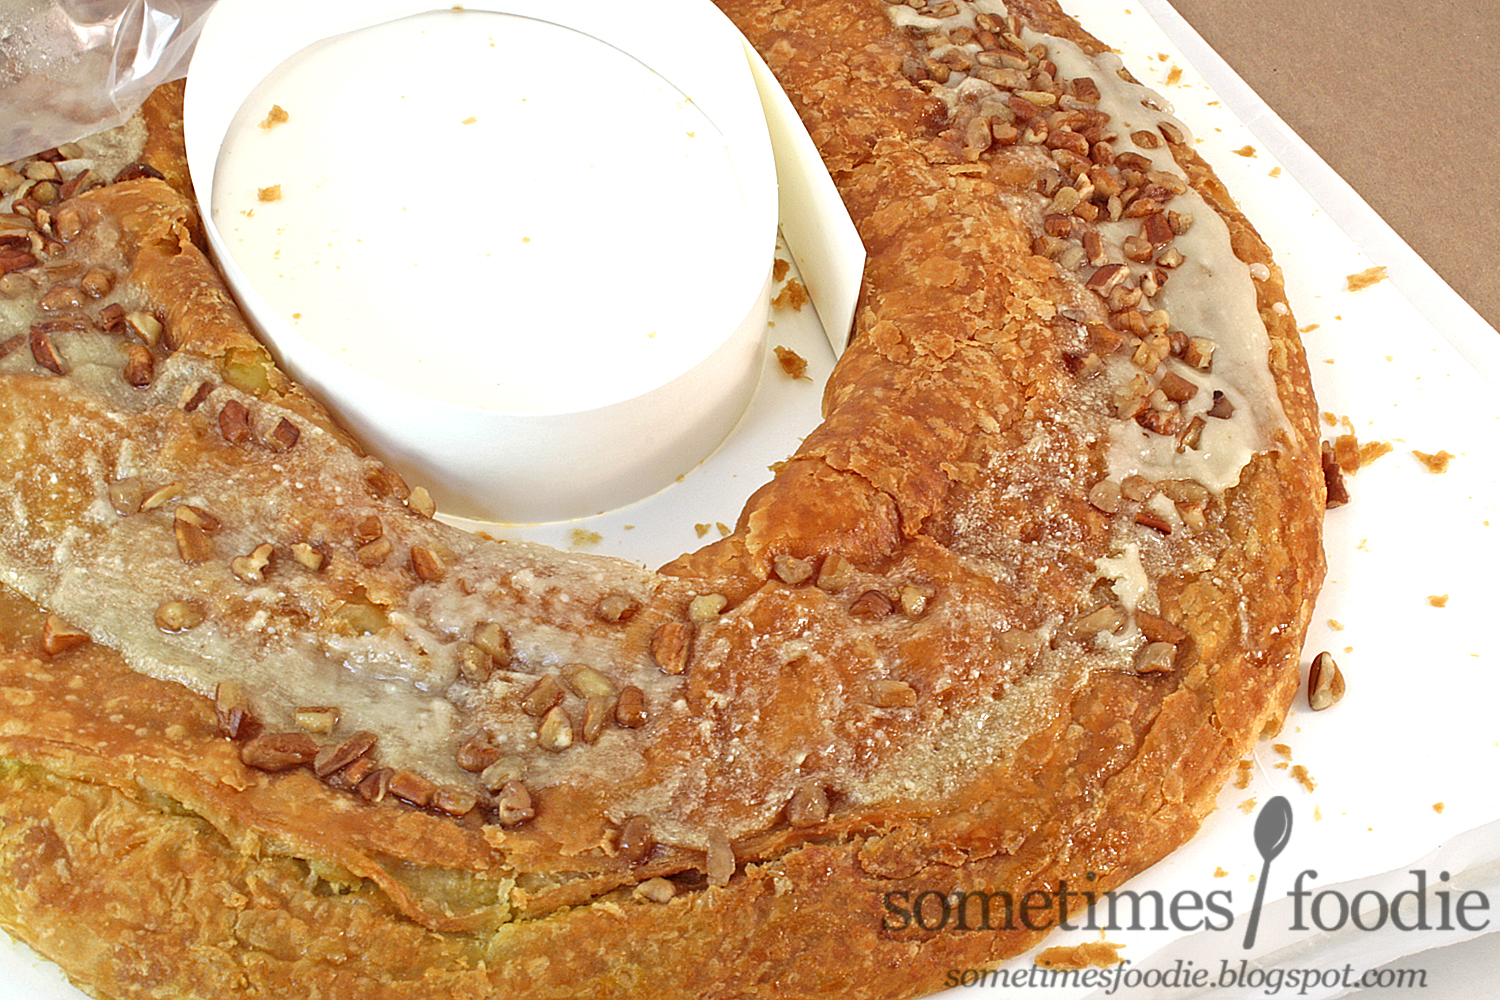 Our Almond Kringle is exceptionally flavorful and smooth. A Danish